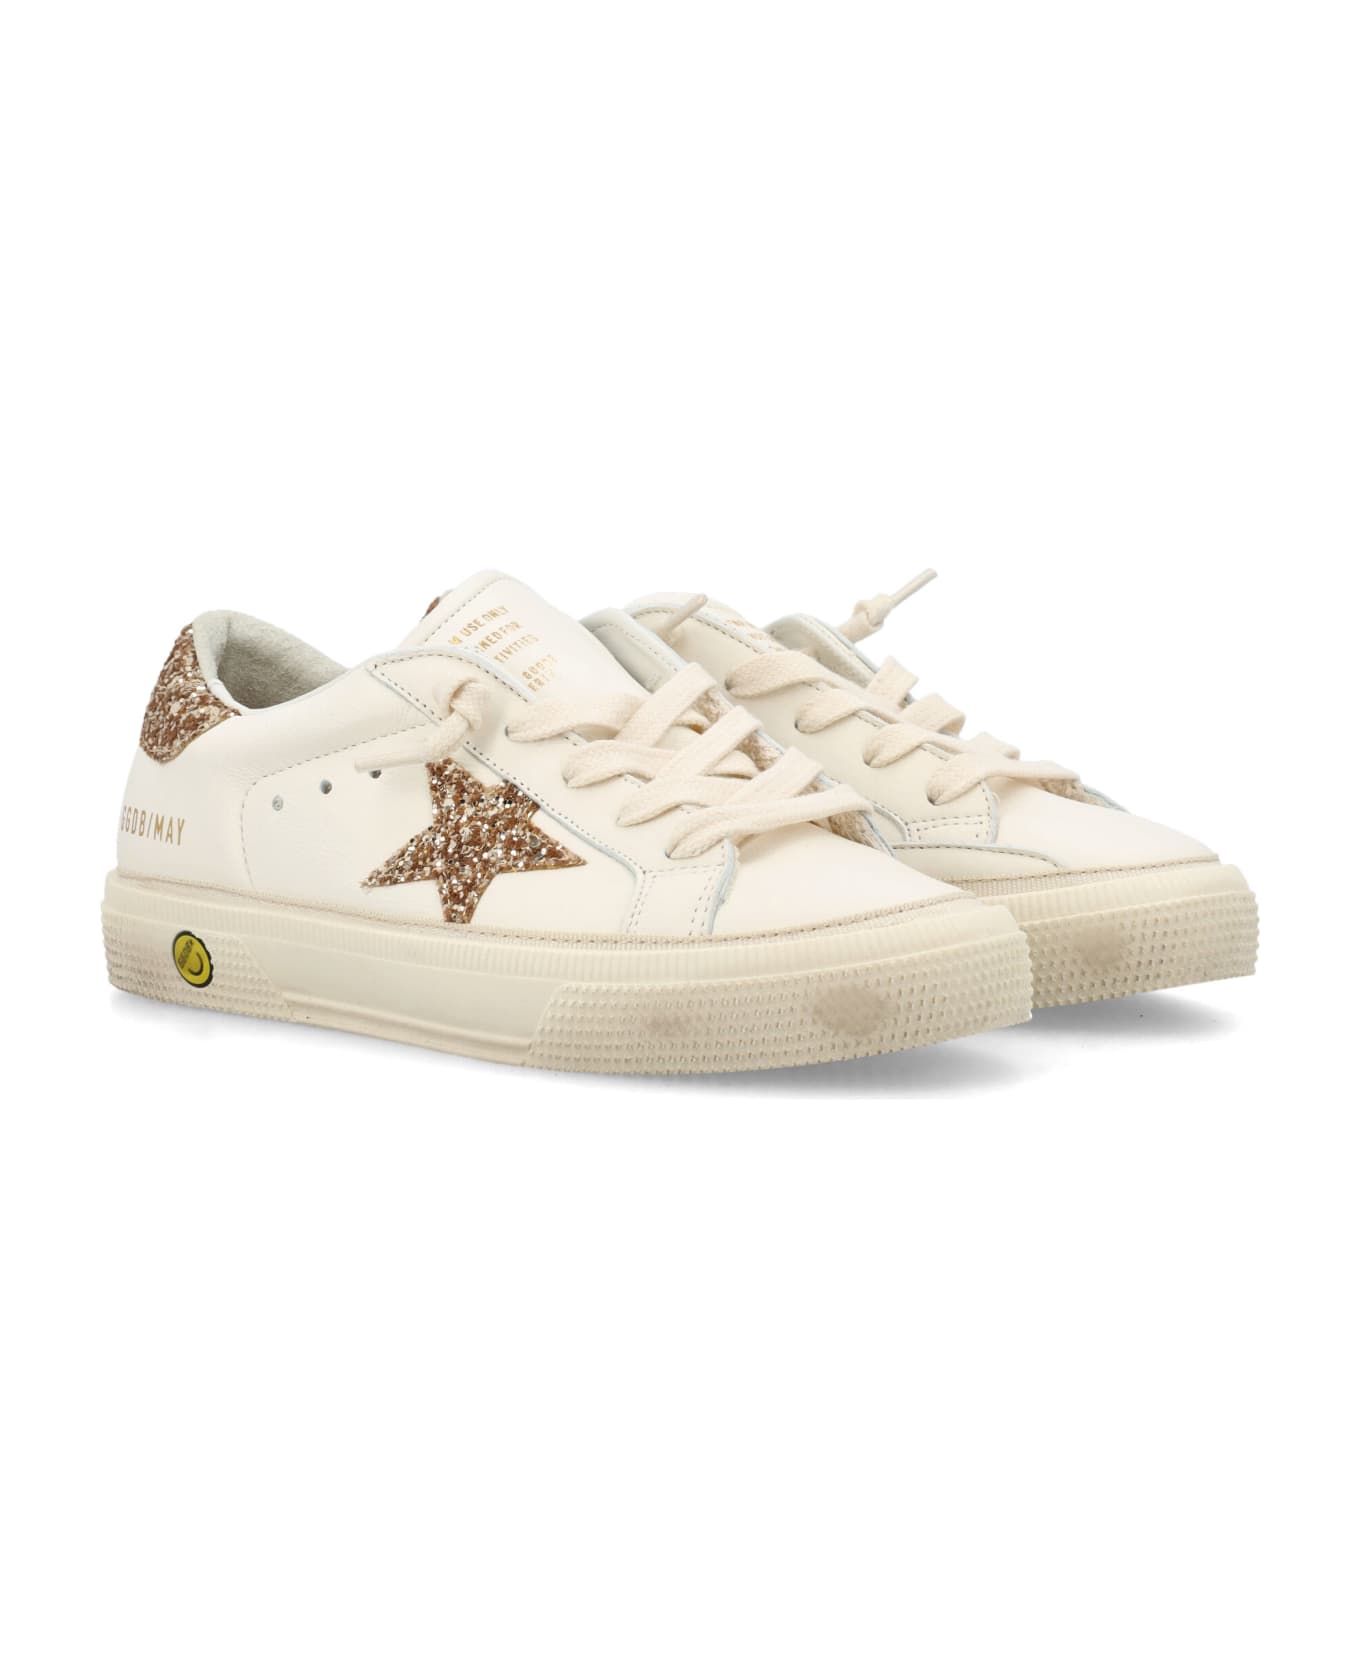 Golden Goose May Sneakers - WHITE/GOLD シューズ